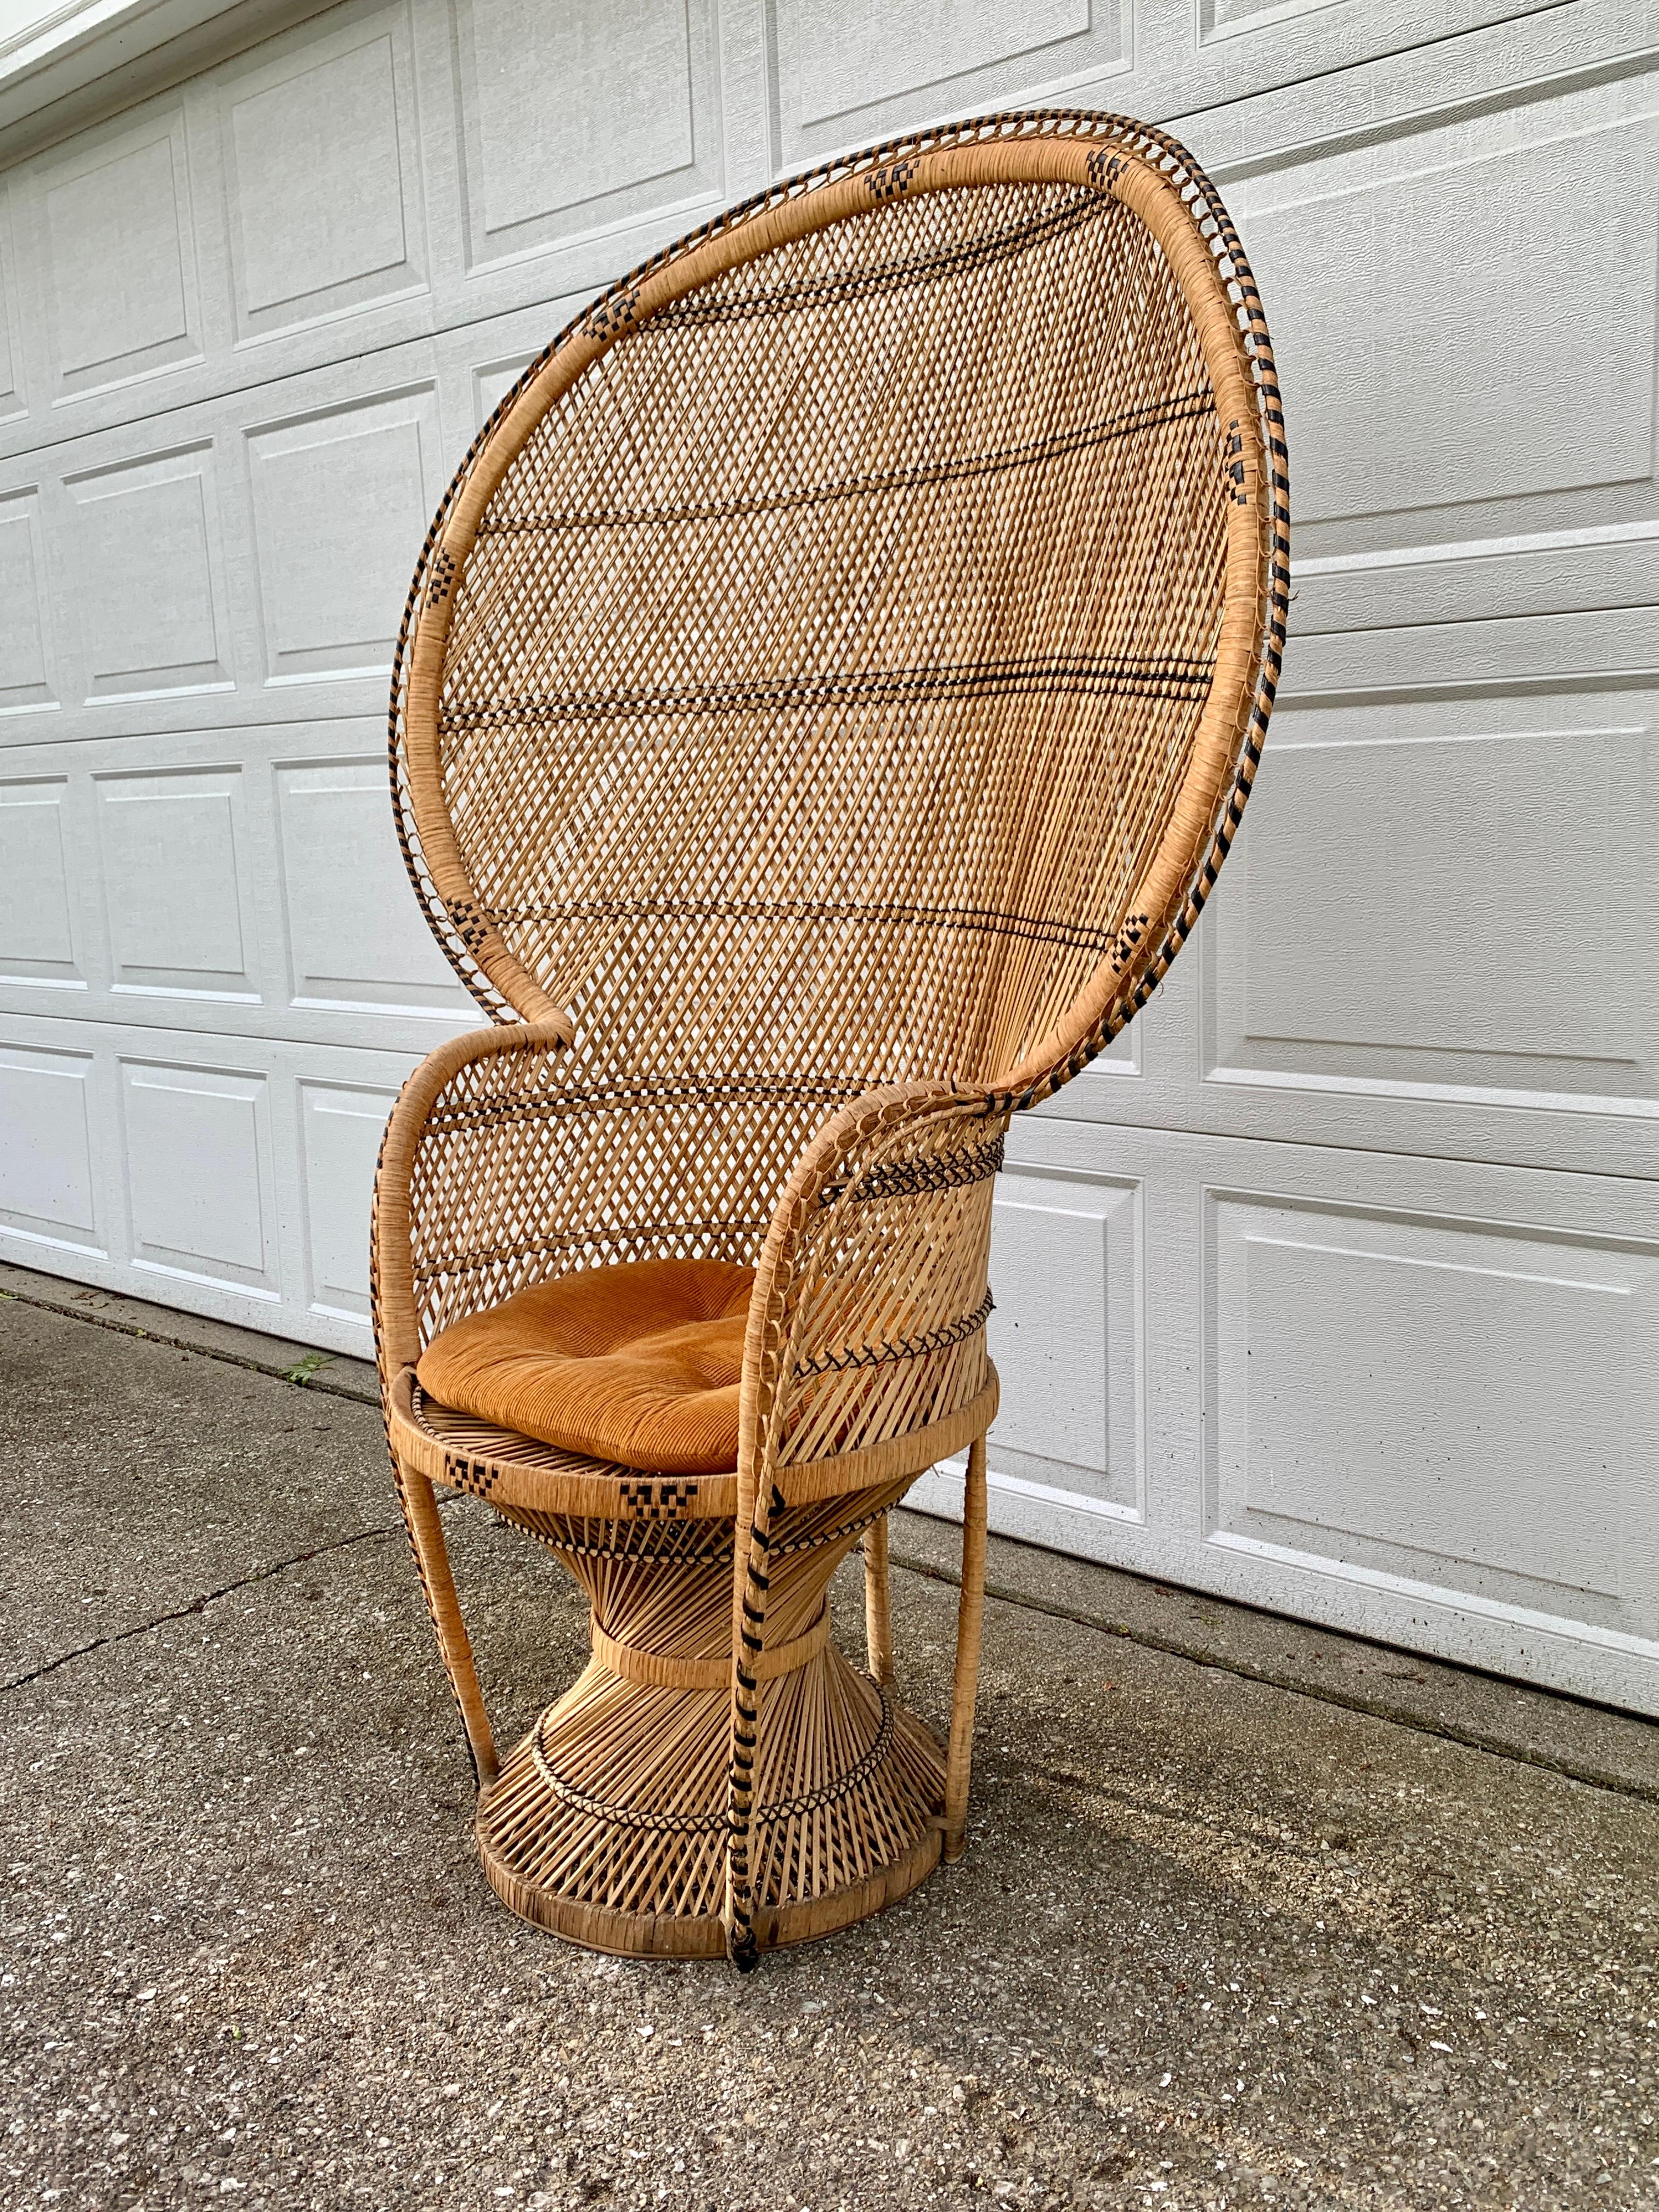 Bohemian Wicker Emanuelle Peacock Chair In Good Condition For Sale In Elkhart, IN